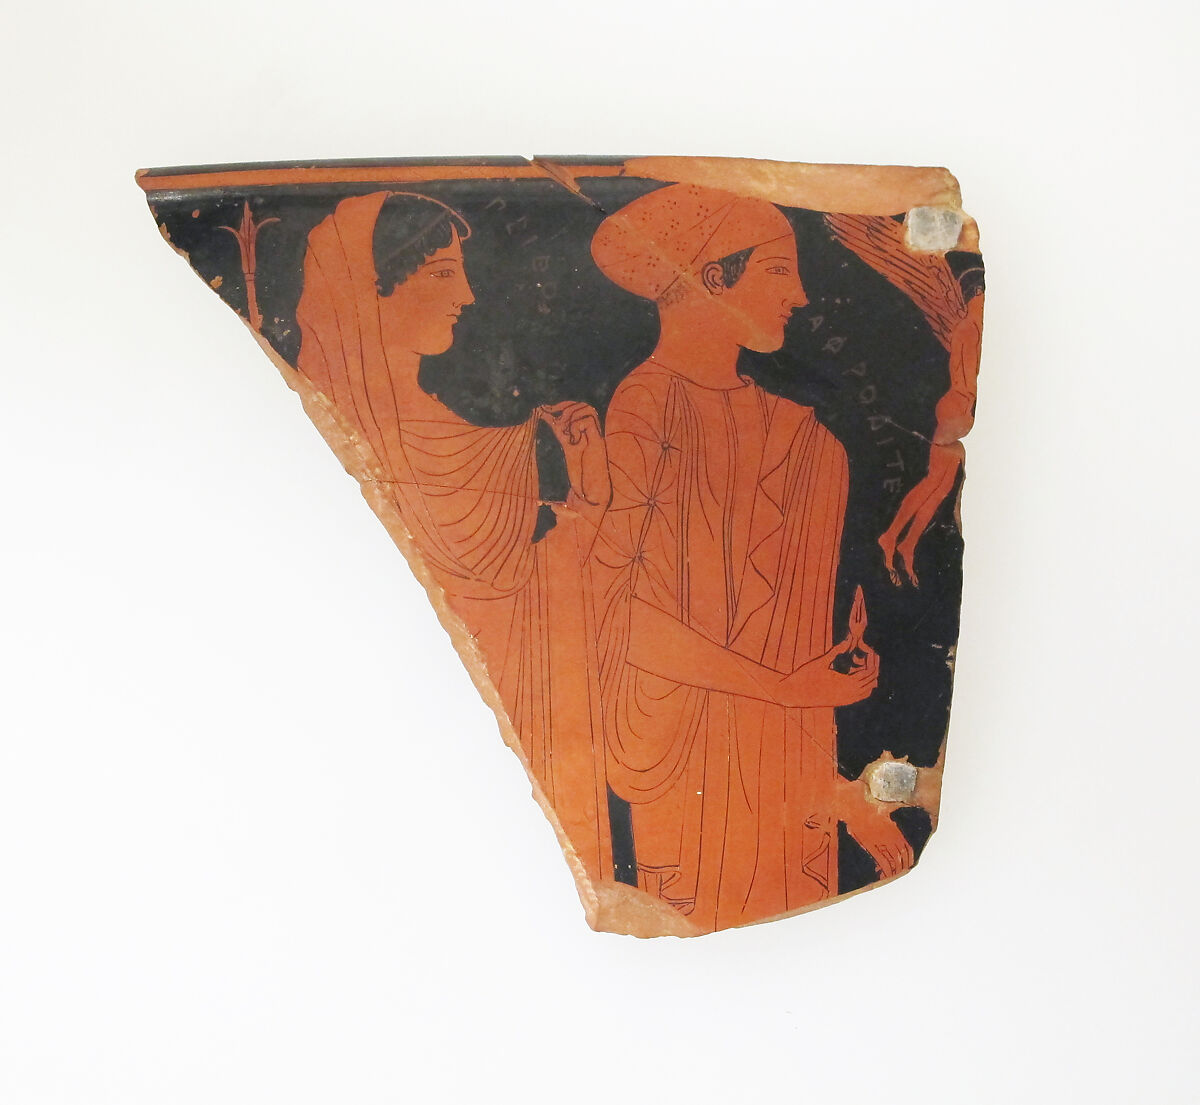 Fragment of a terracotta skyphos (deep drinking cup), Attributed to a follower of Douris, Terracotta, Greek, Attic 